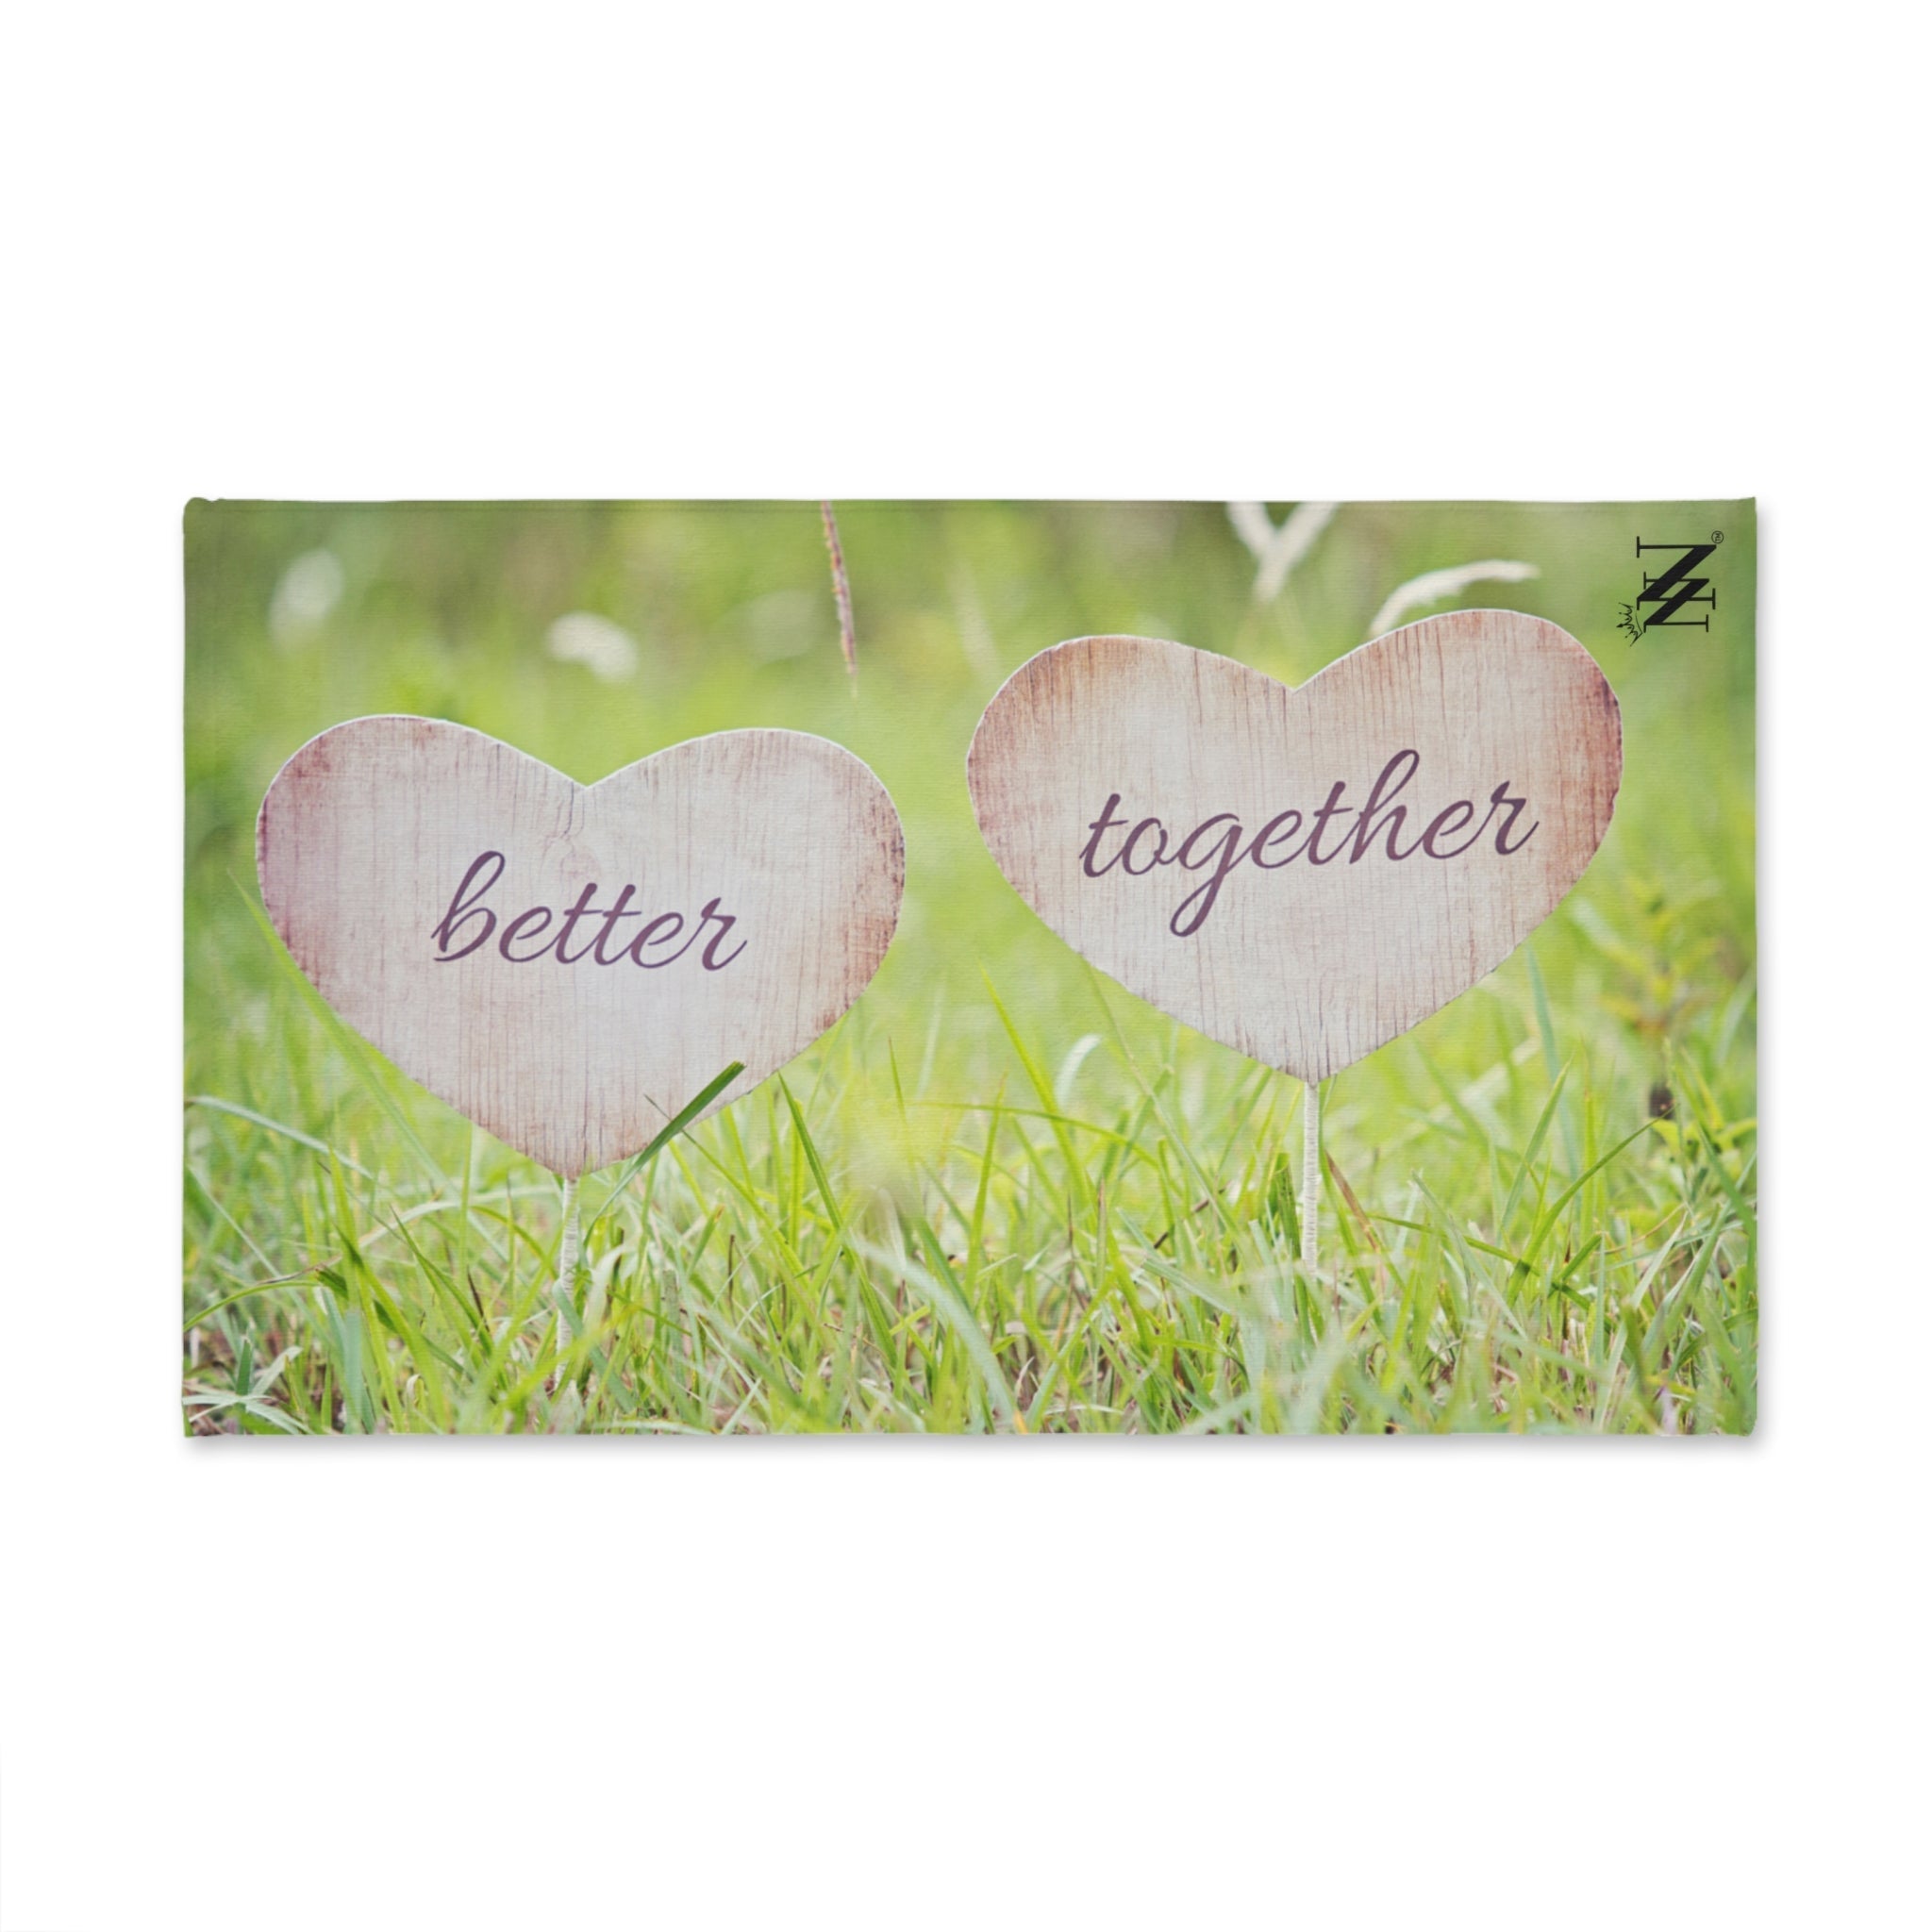 Wooden Better Together White | Funny Gifts for Men - Gifts for Him - Birthday Gifts for Men, Him, Her, Husband, Boyfriend, Girlfriend, New Couple Gifts, Fathers & Valentines Day Gifts, Christmas Gifts NECTAR NAPKINS